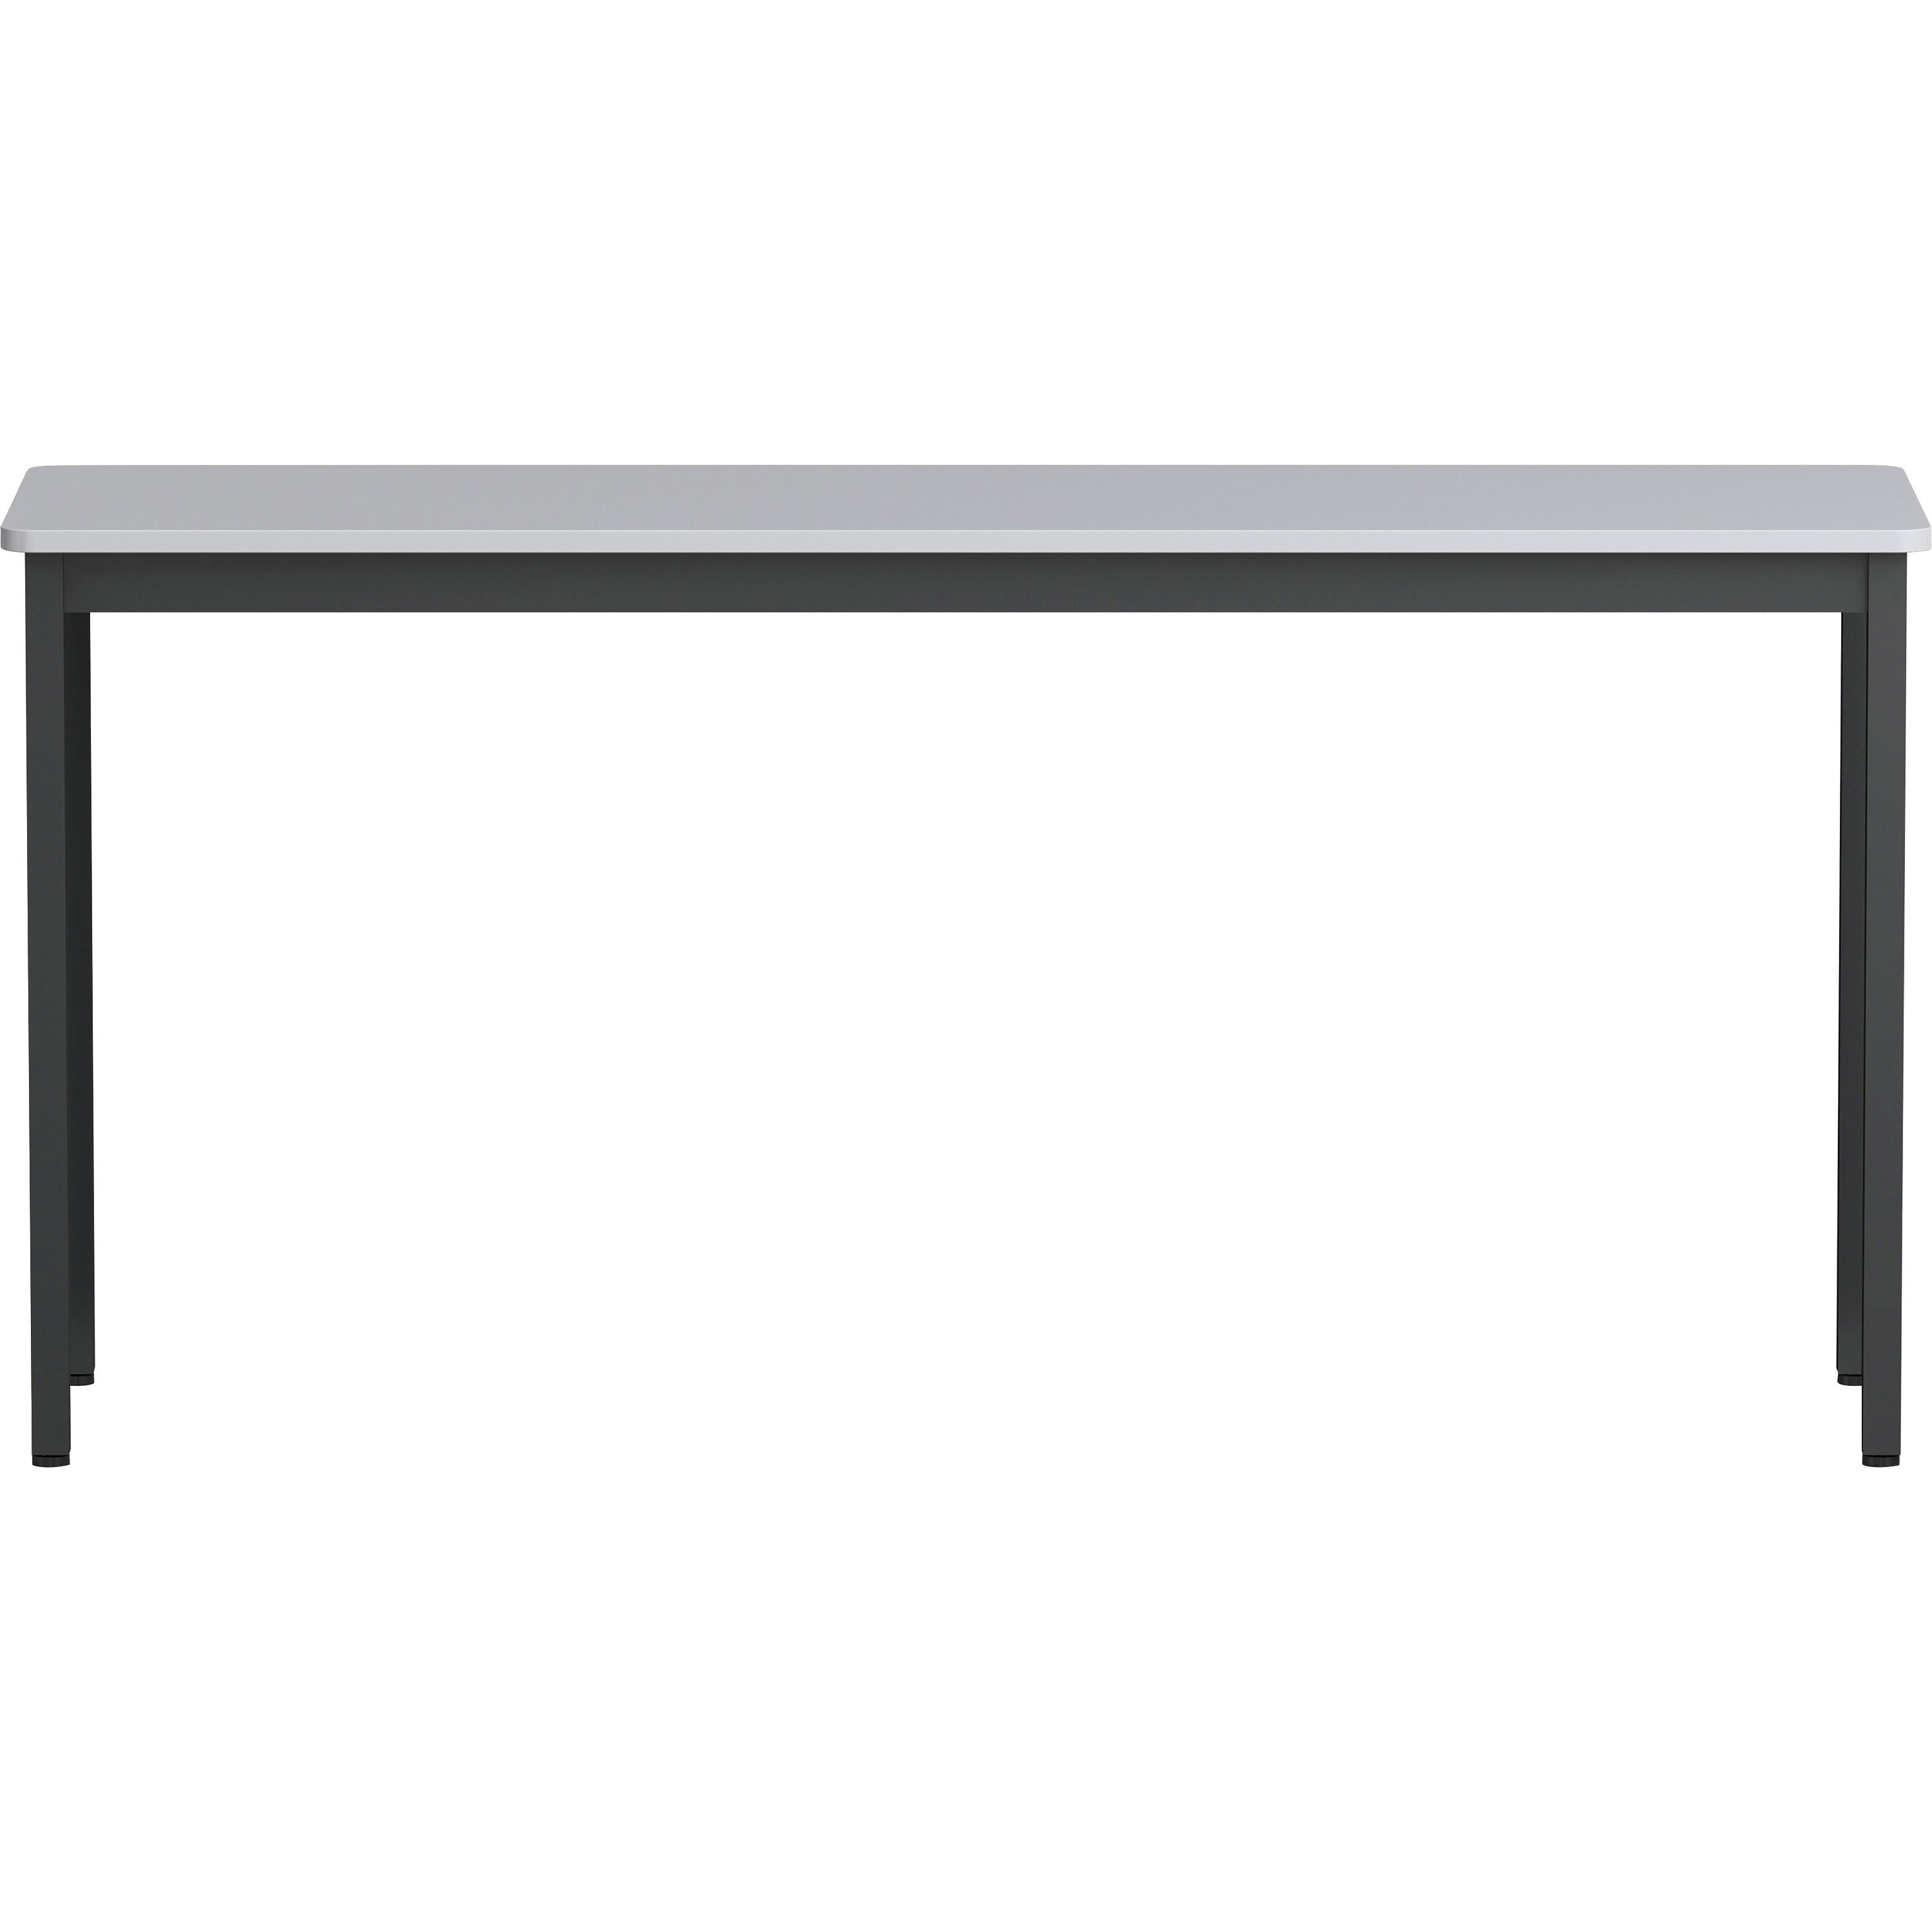 lorell-utility-table-for-table-topgray-rectangle-laminated-top-powder-coated-black-base-500-lb-capacity-x-5988-table-top-width-x-1813-table-top-depth-30-height-assembly-required-melamine-top-material-1-each_llr60754 - 2